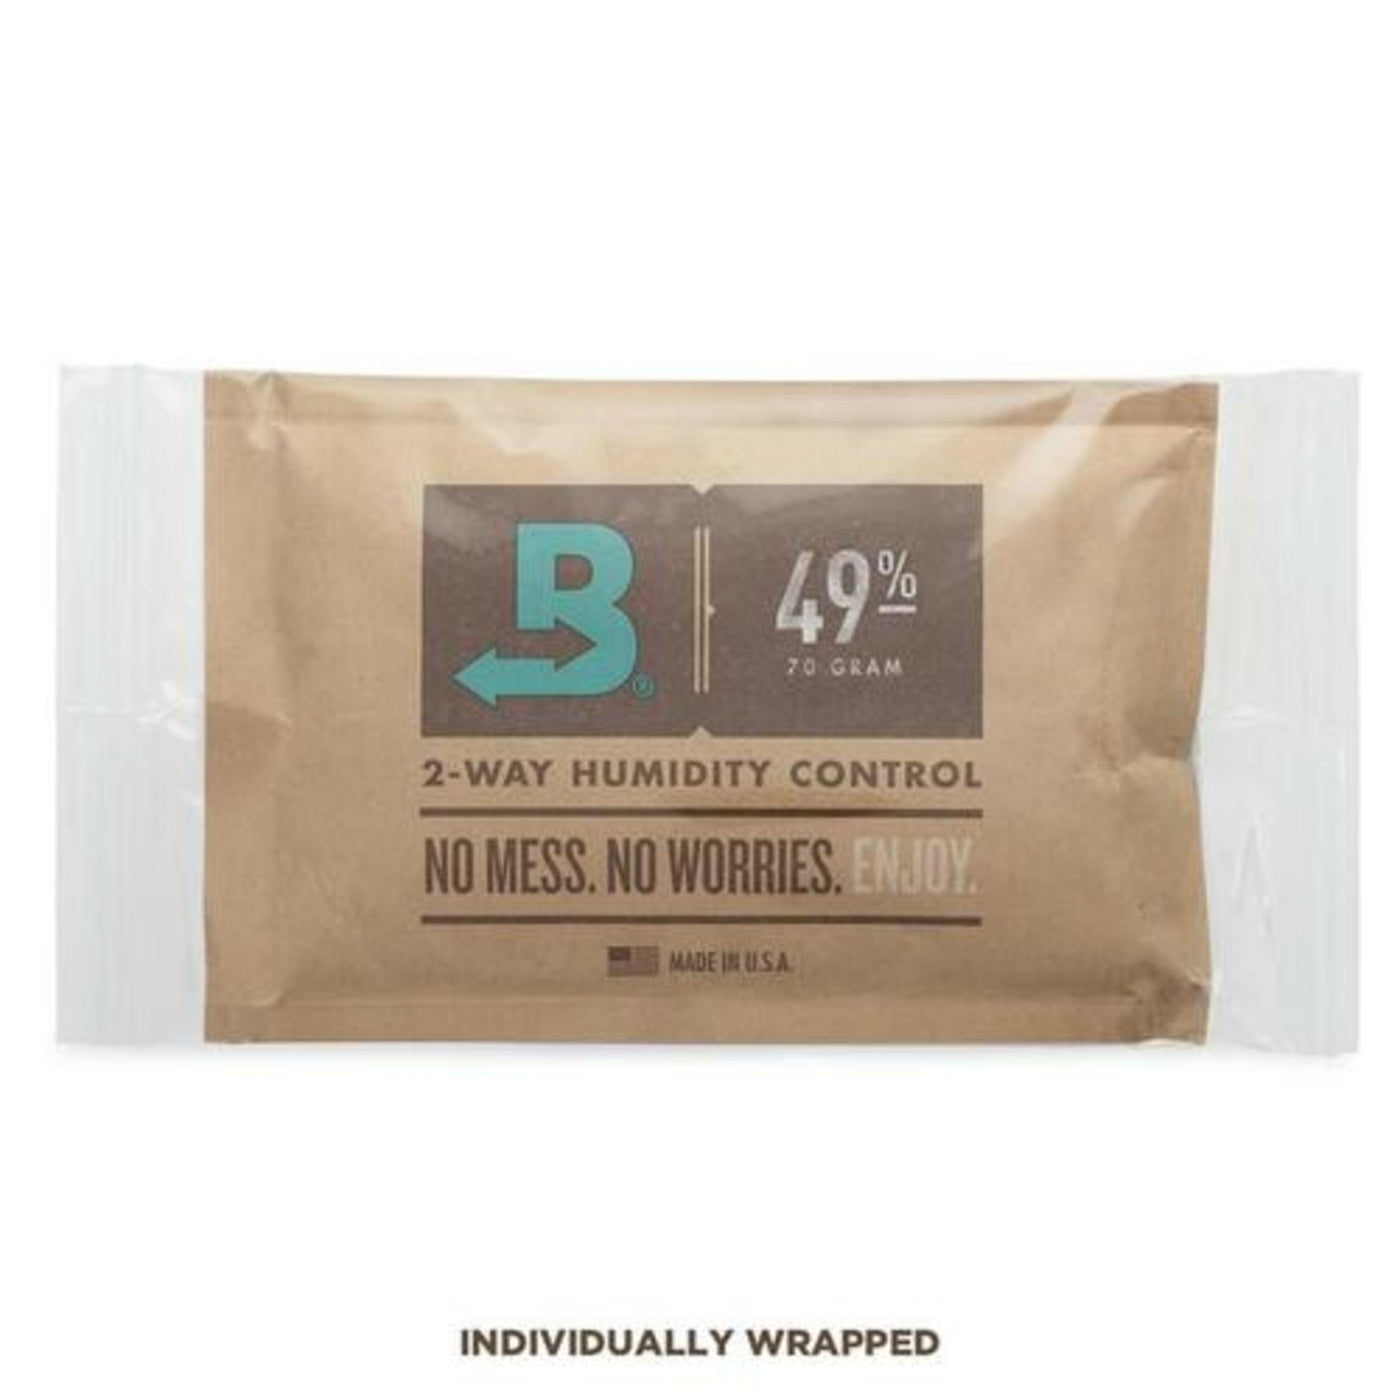 Boveda 2-Way Humidity Control Pack for Brass Instruments, 49% RH, 40g (BRKIT49HA-2)